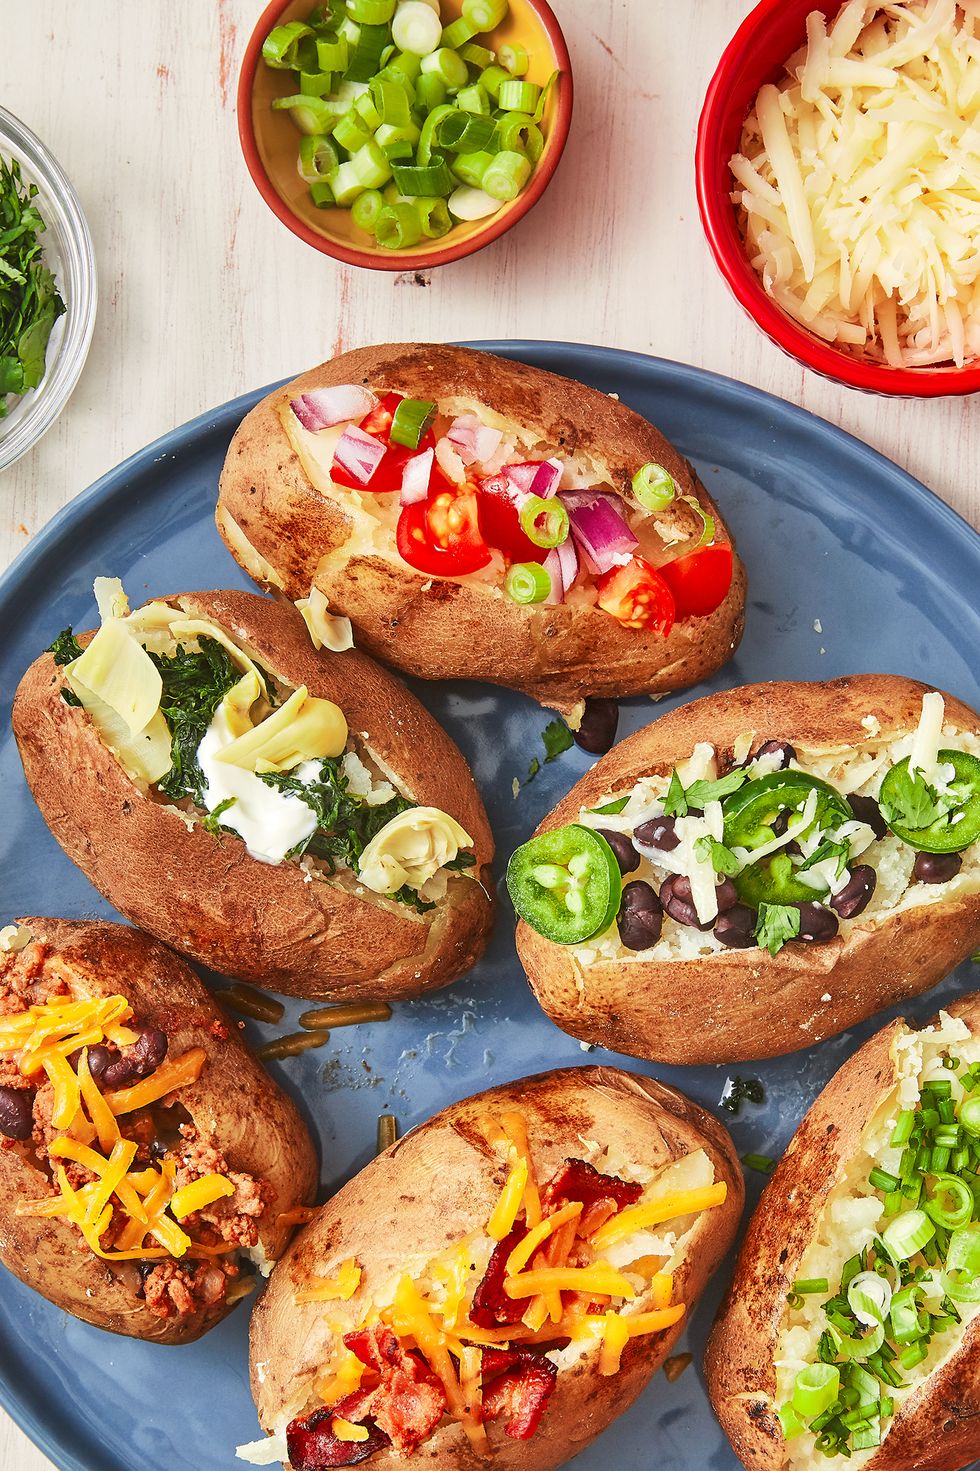 22 Best Baked Potato Toppings - How to Top Baked Potatoes